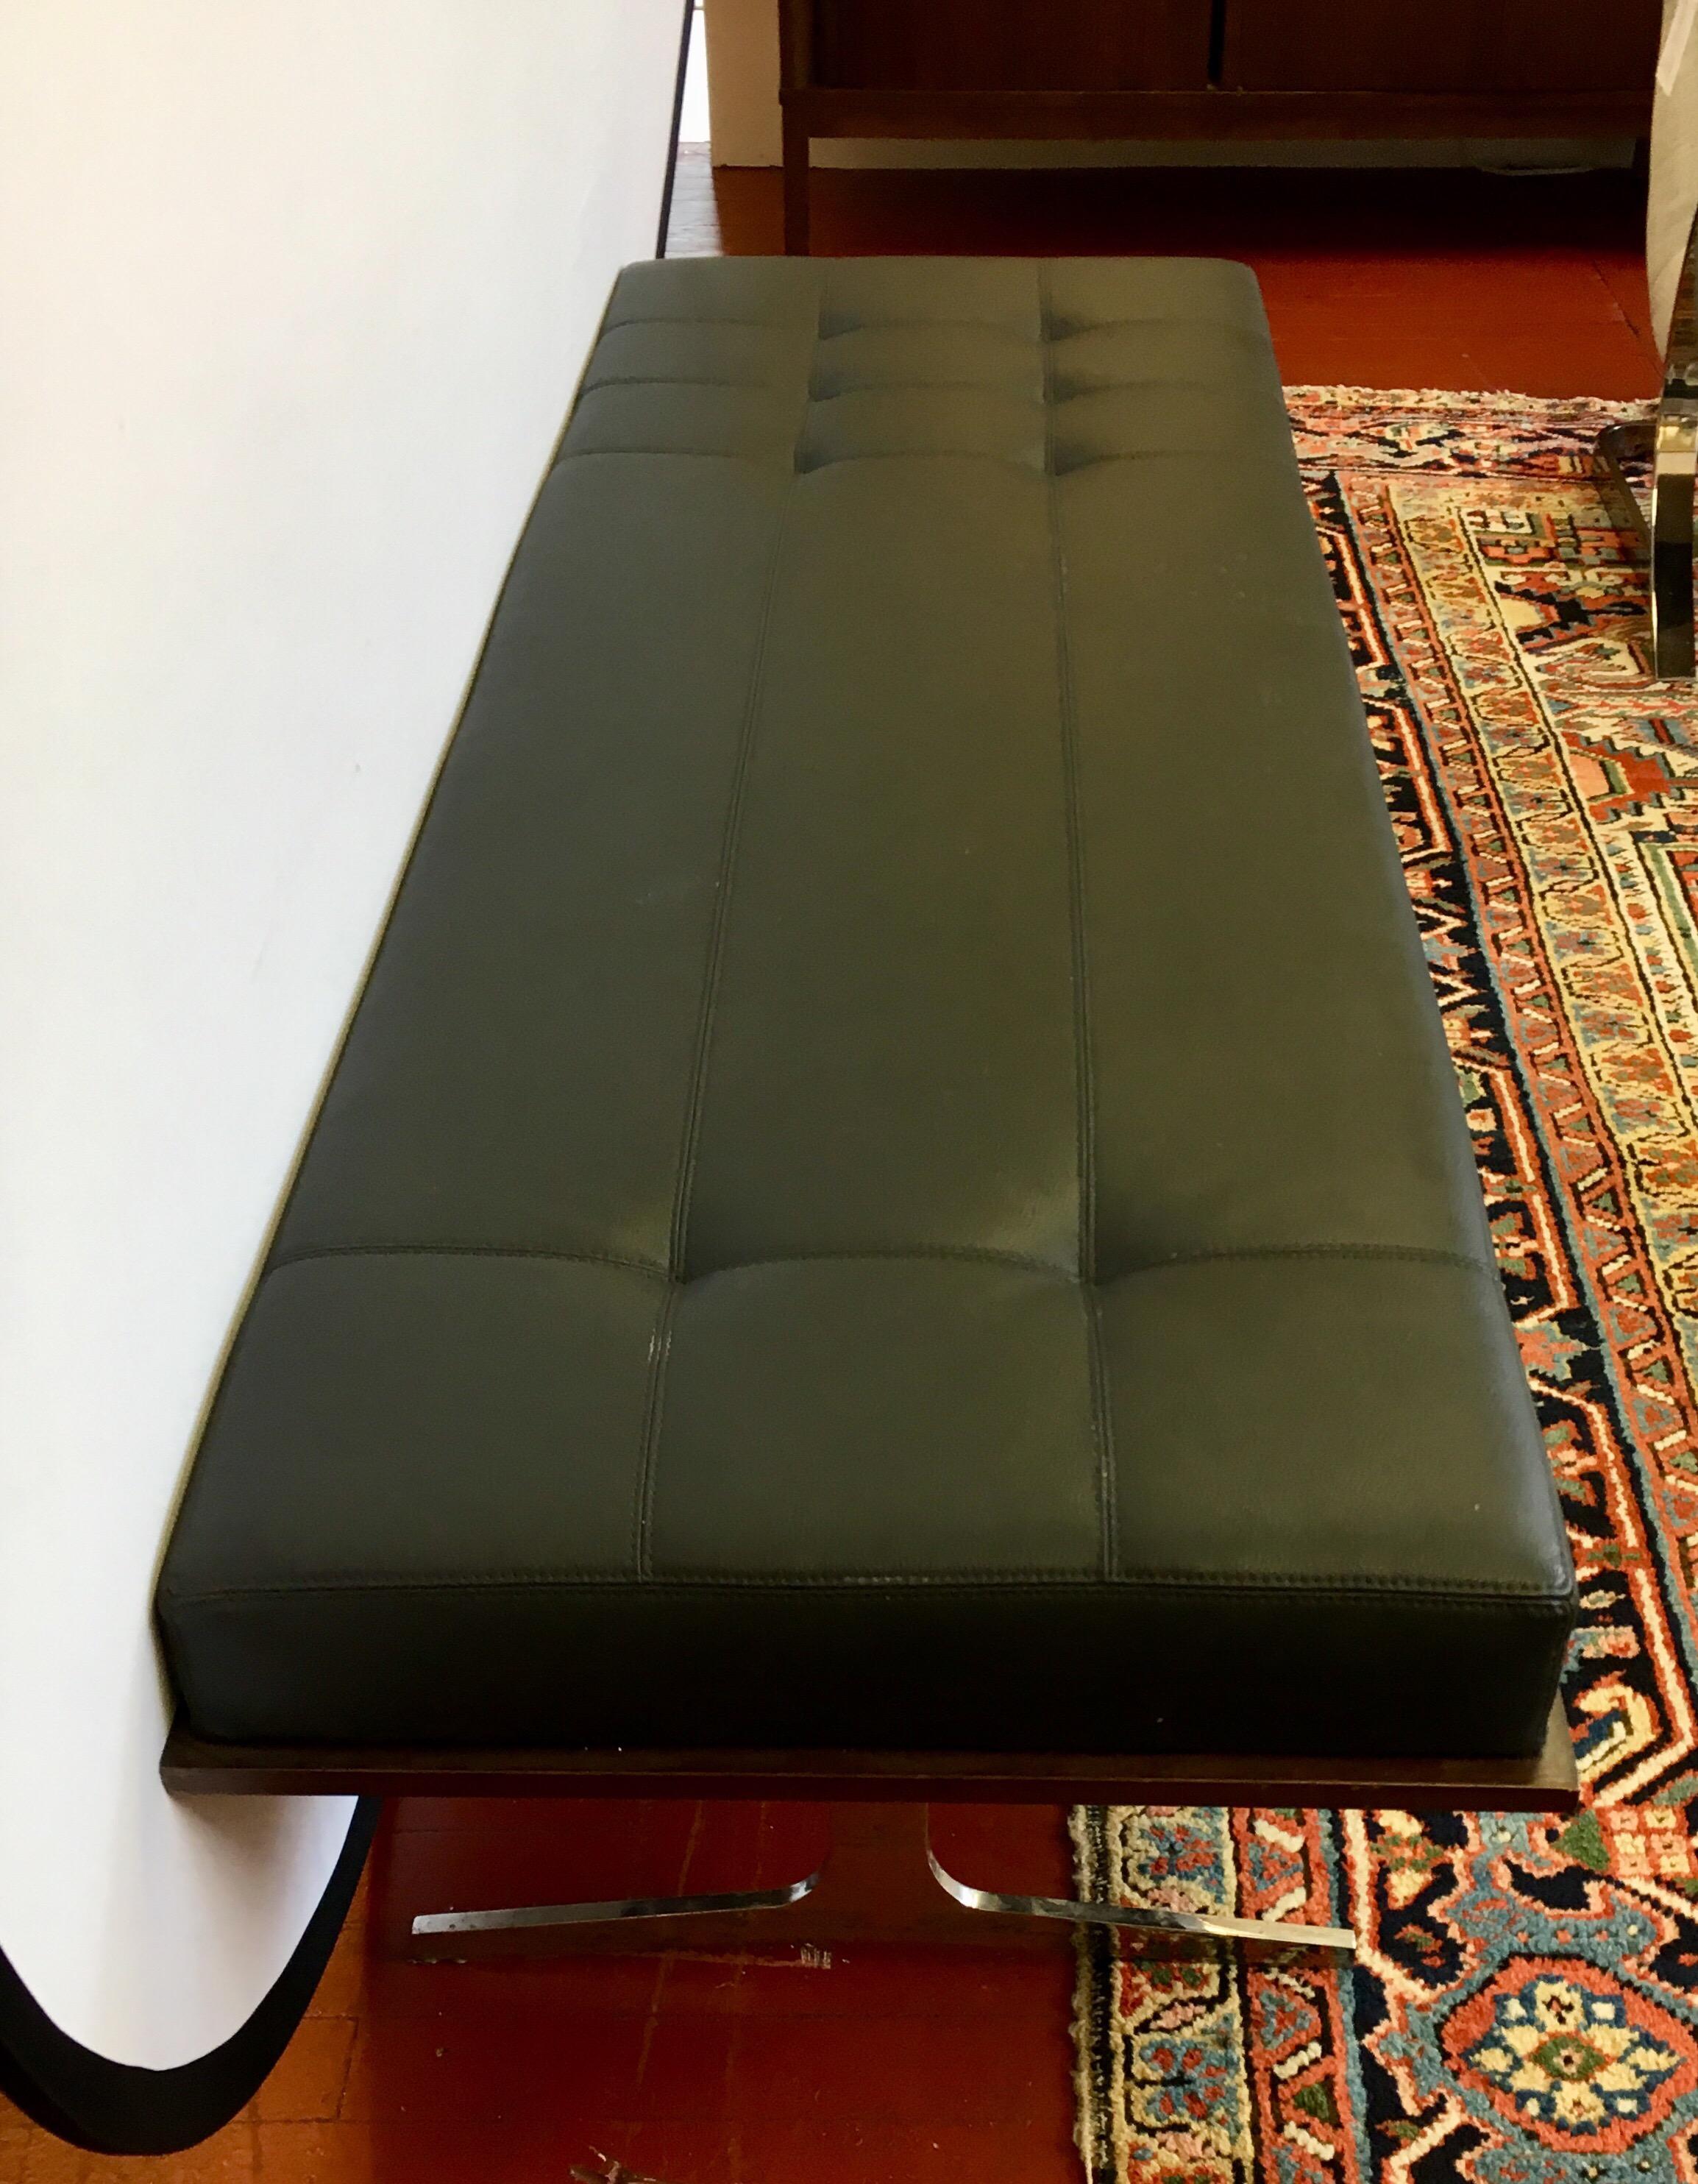 Bernhardt Black Leather and Mahogany Chaise Lounge Settee Lounger Daybed 2